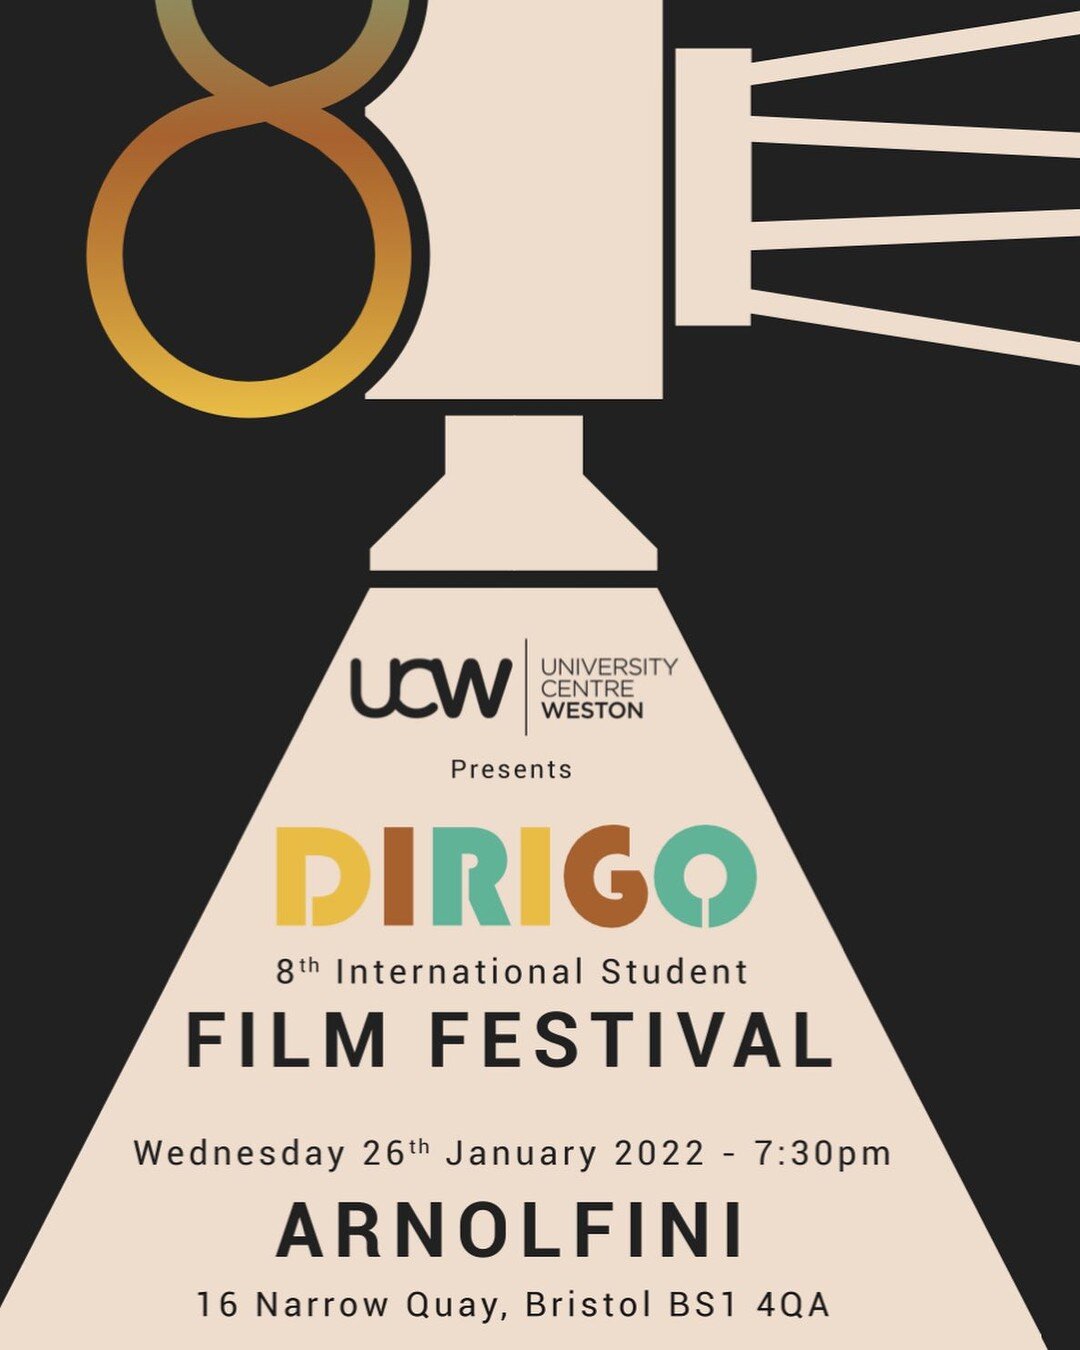 And that&rsquo;s a wrap! A massive thank you to everyone who submitted their films! 

We hope you can join us for this years Dirigo international student film festival which we are pleased to announce will be returning to the Arnolfini in Bristol on 